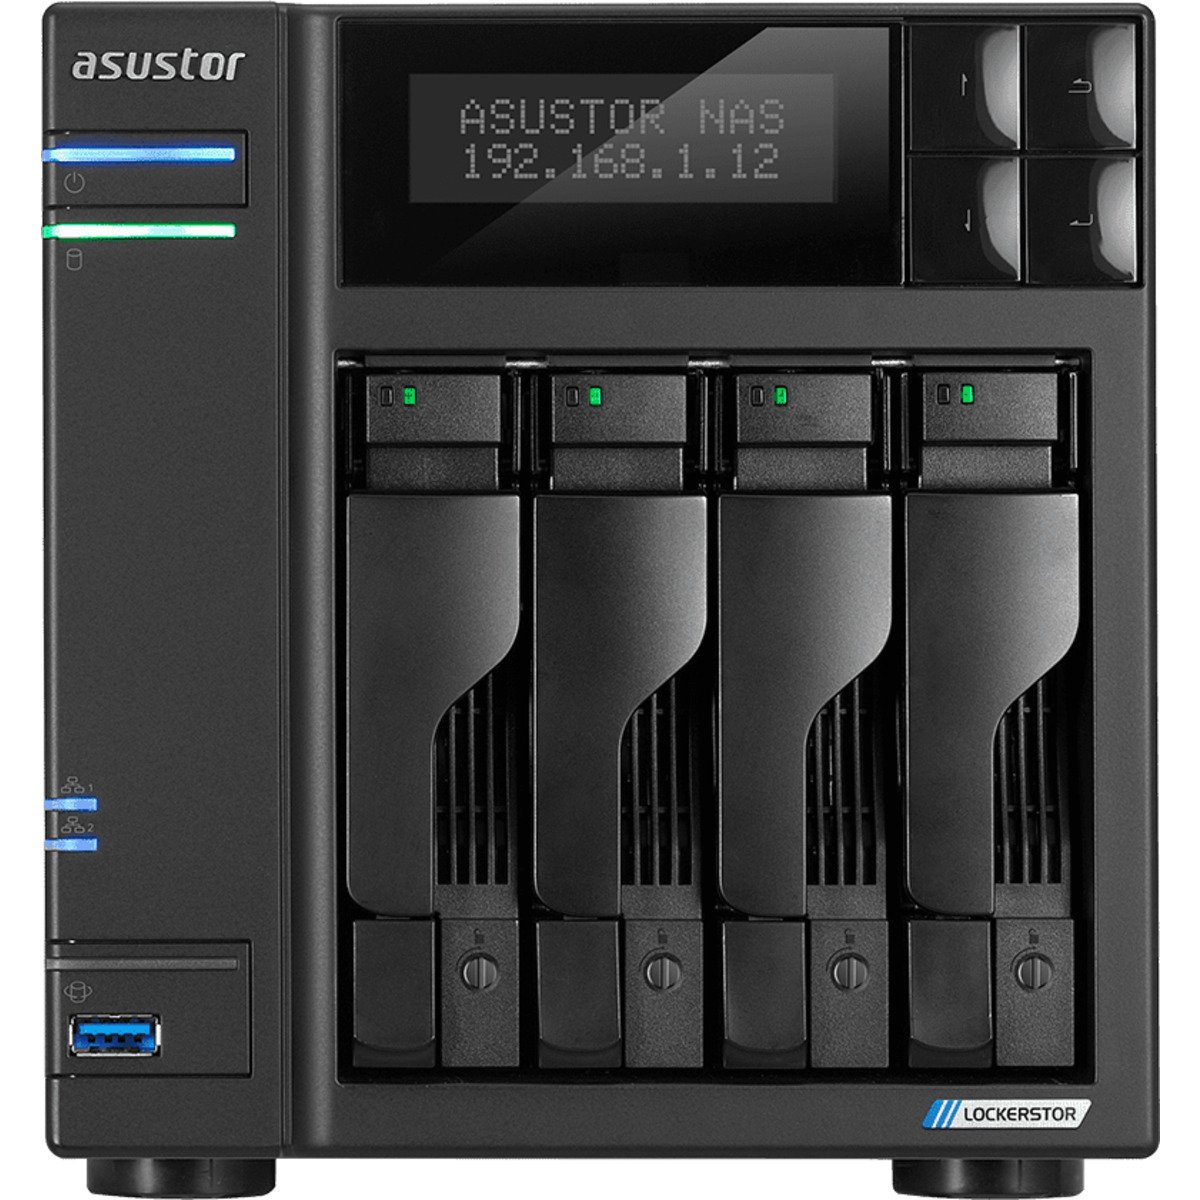 ASUSTOR AS6604T Lockerstor 4 56tb 4-Bay Desktop Multimedia / Power User / Business NAS - Network Attached Storage Device 4x14tb Seagate EXOS X18 ST14000NM000J 3.5 7200rpm SATA 6Gb/s HDD ENTERPRISE Class Drives Installed - Burn-In Tested - FREE RAM UPGRADE AS6604T Lockerstor 4